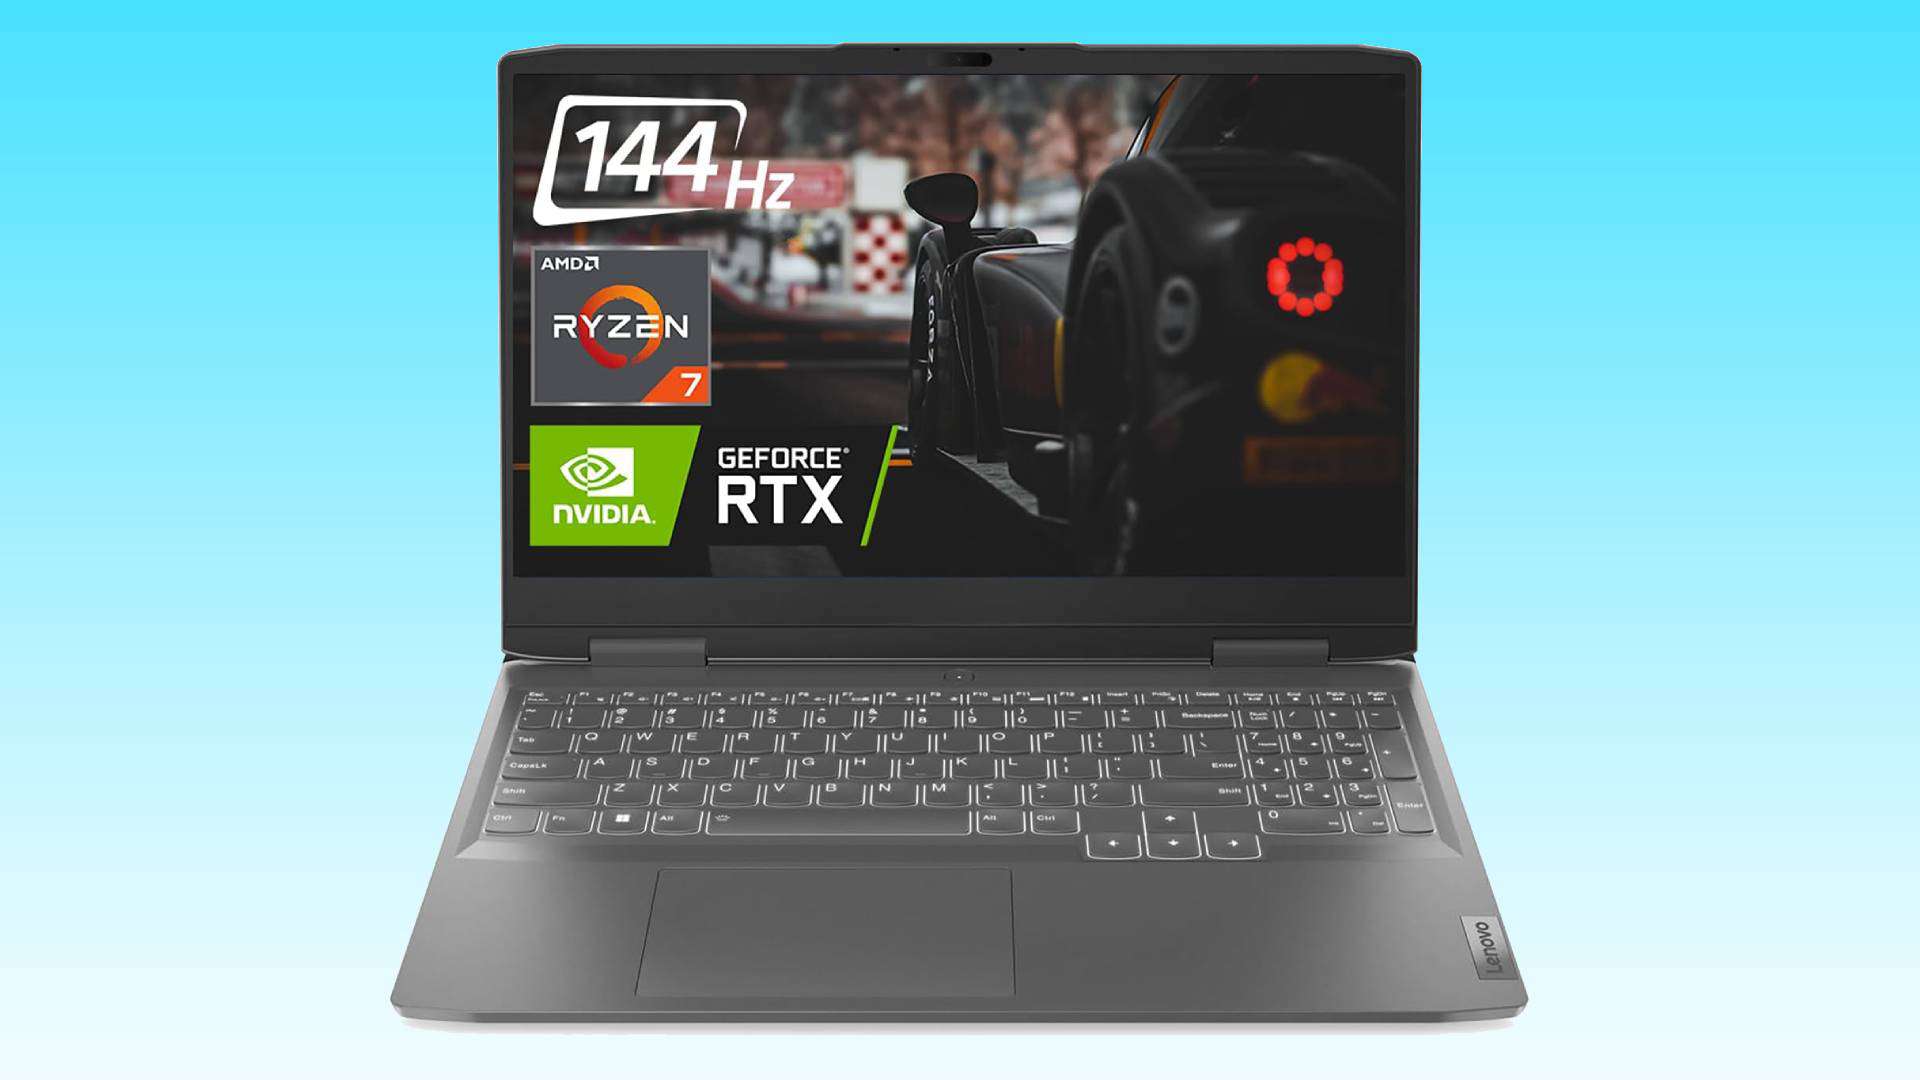 Lenovo RTX 4050 gaming laptop displaying high-performance hardware badges and a racing game on the screen, available with a Save $54 Amazon deal.